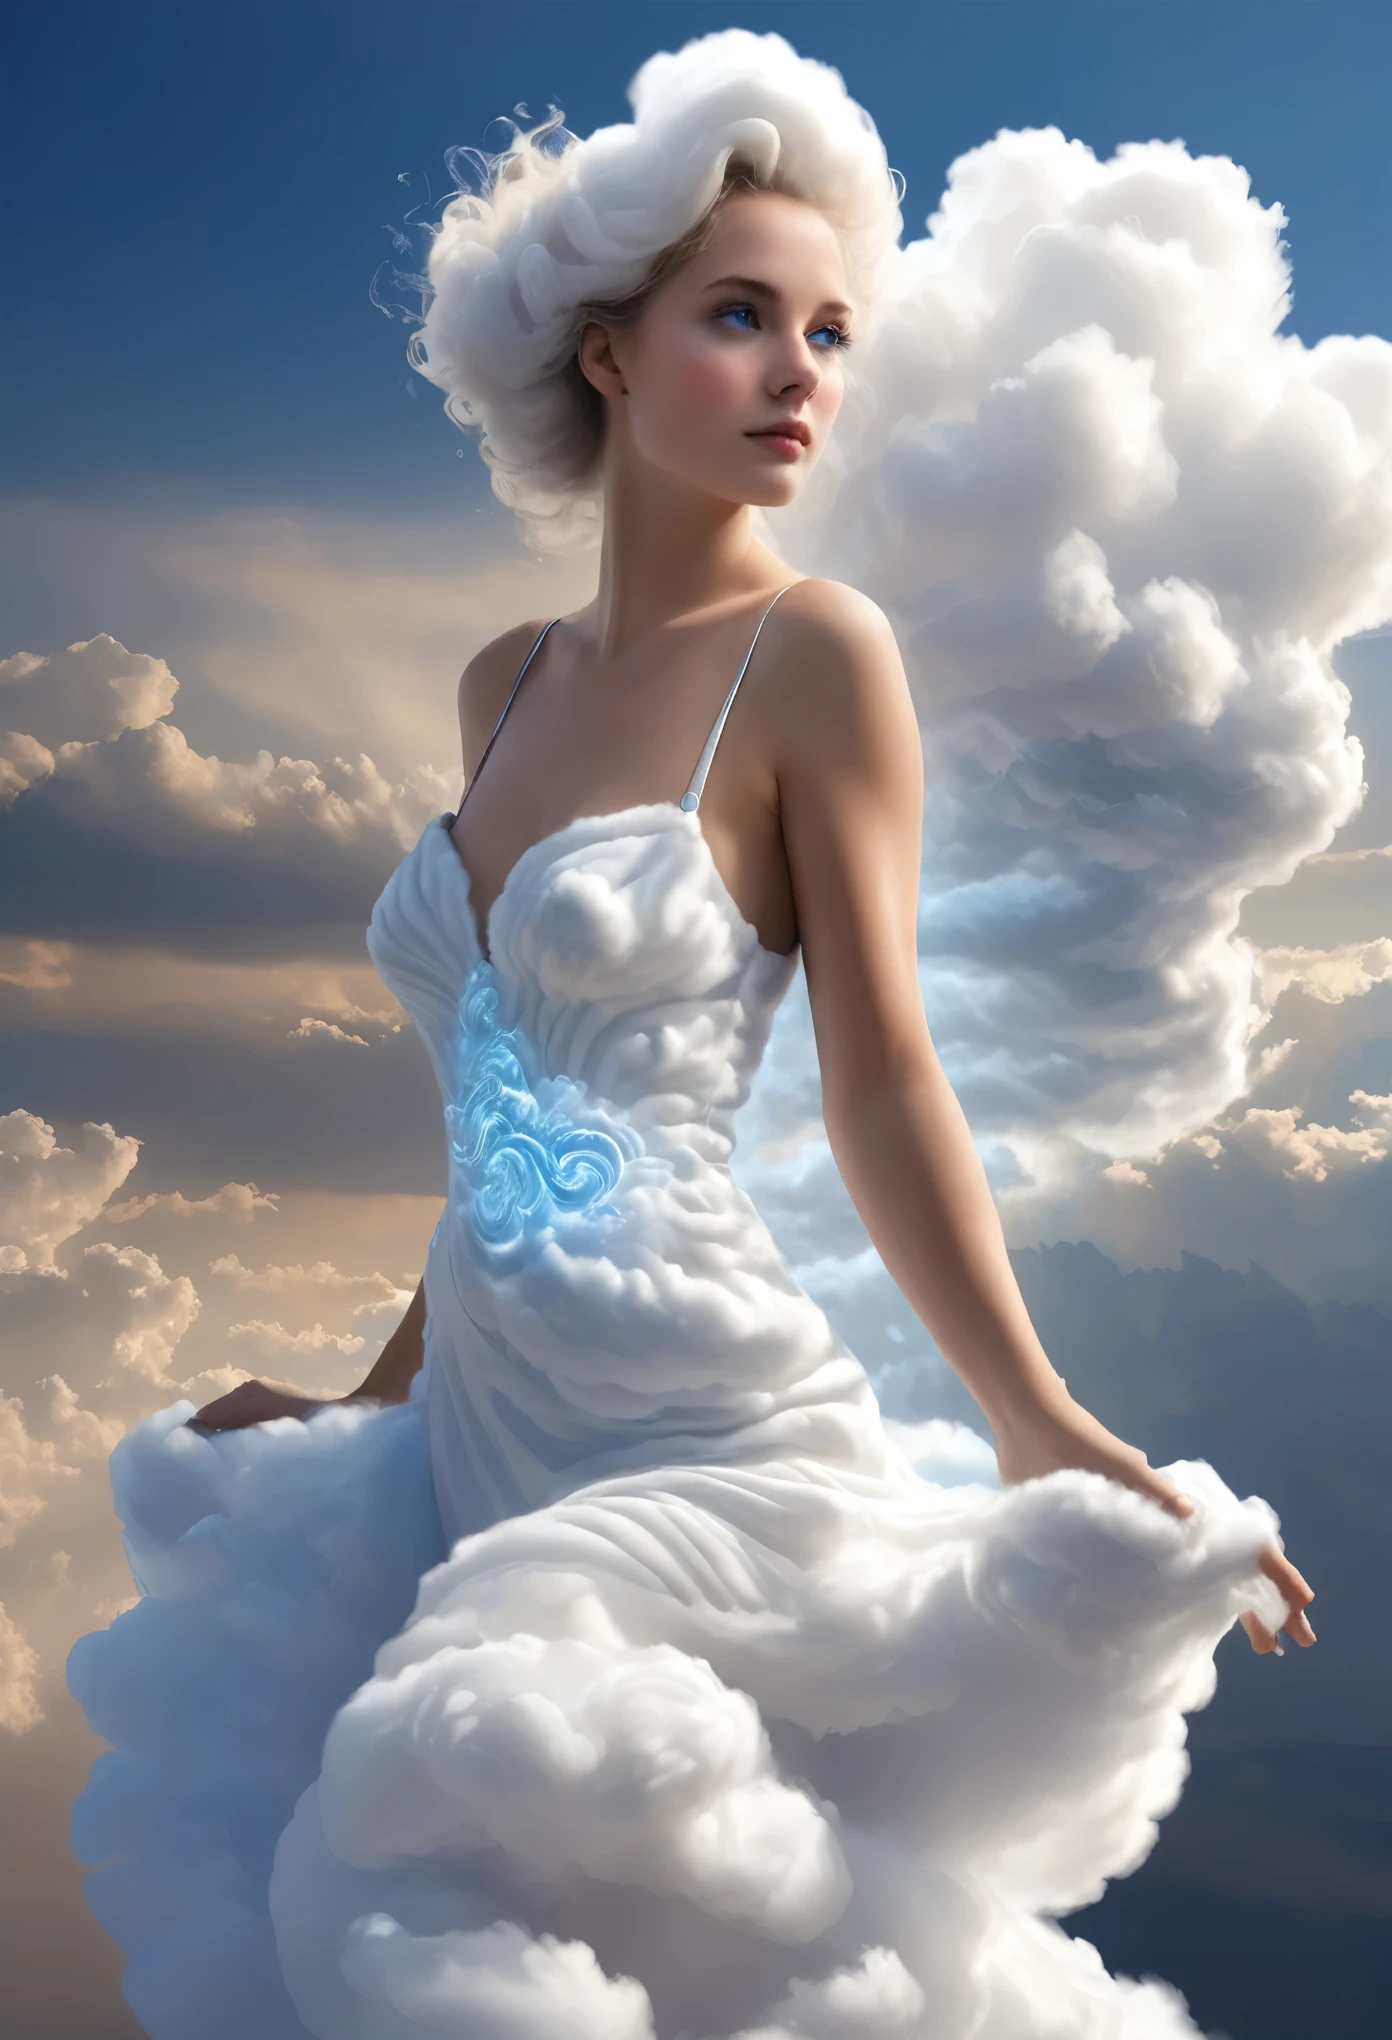 Dans une soirée chic, a sublime French woman aged 25 wearing a long evening dress made of white clouds, longues jambes, cheveux longs sublimes, electric blue eyes, regard intense , visage heureux et rayonnant, sublime poitrine effet push-up, sublime décolleté plongeant, ((proportions parfaites, masterpiece, hyperrealistic, masterpiece, superior quality, high resolution, Extremely detailed, highly detailed 8K wallpaper))